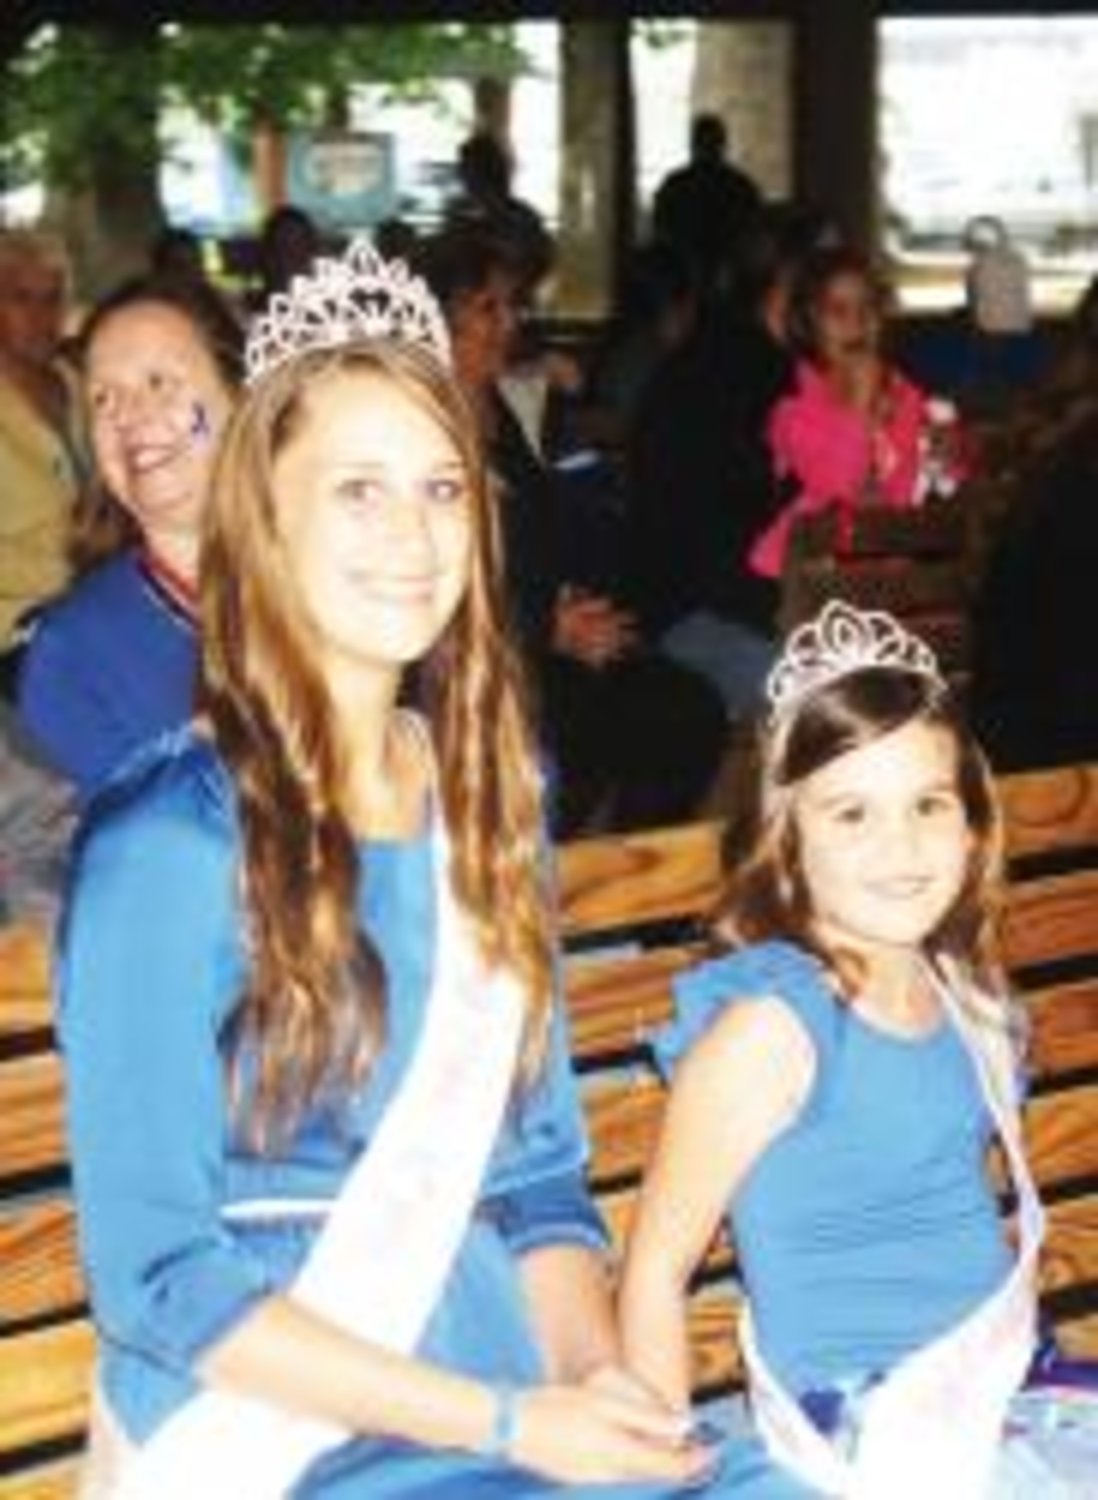 Newly crowned Miss Junior Dogwood Aleigh Farnham and Little Miss Dogwood Hannah Gilbreath began their duties last Tuesday at the candlelight service commemorating April as "Child Abuse Prevention Month."